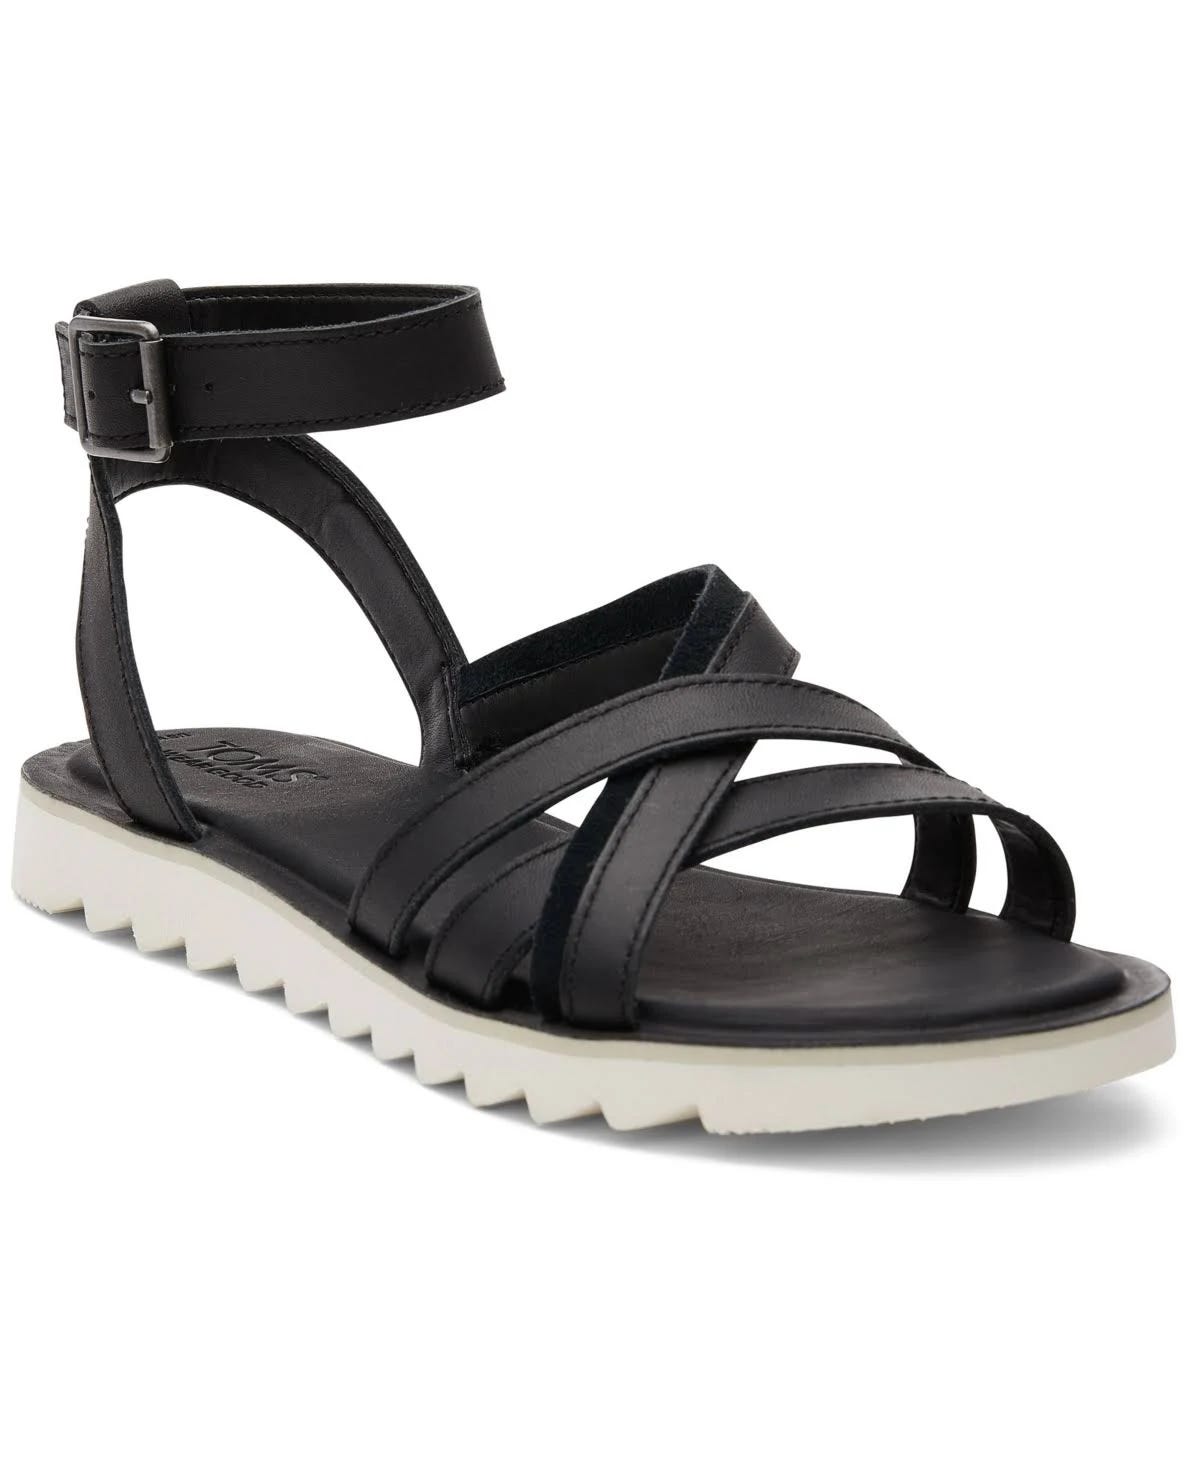 Tom's Rory Black Flat Sandals for Comfortable Walks | Image